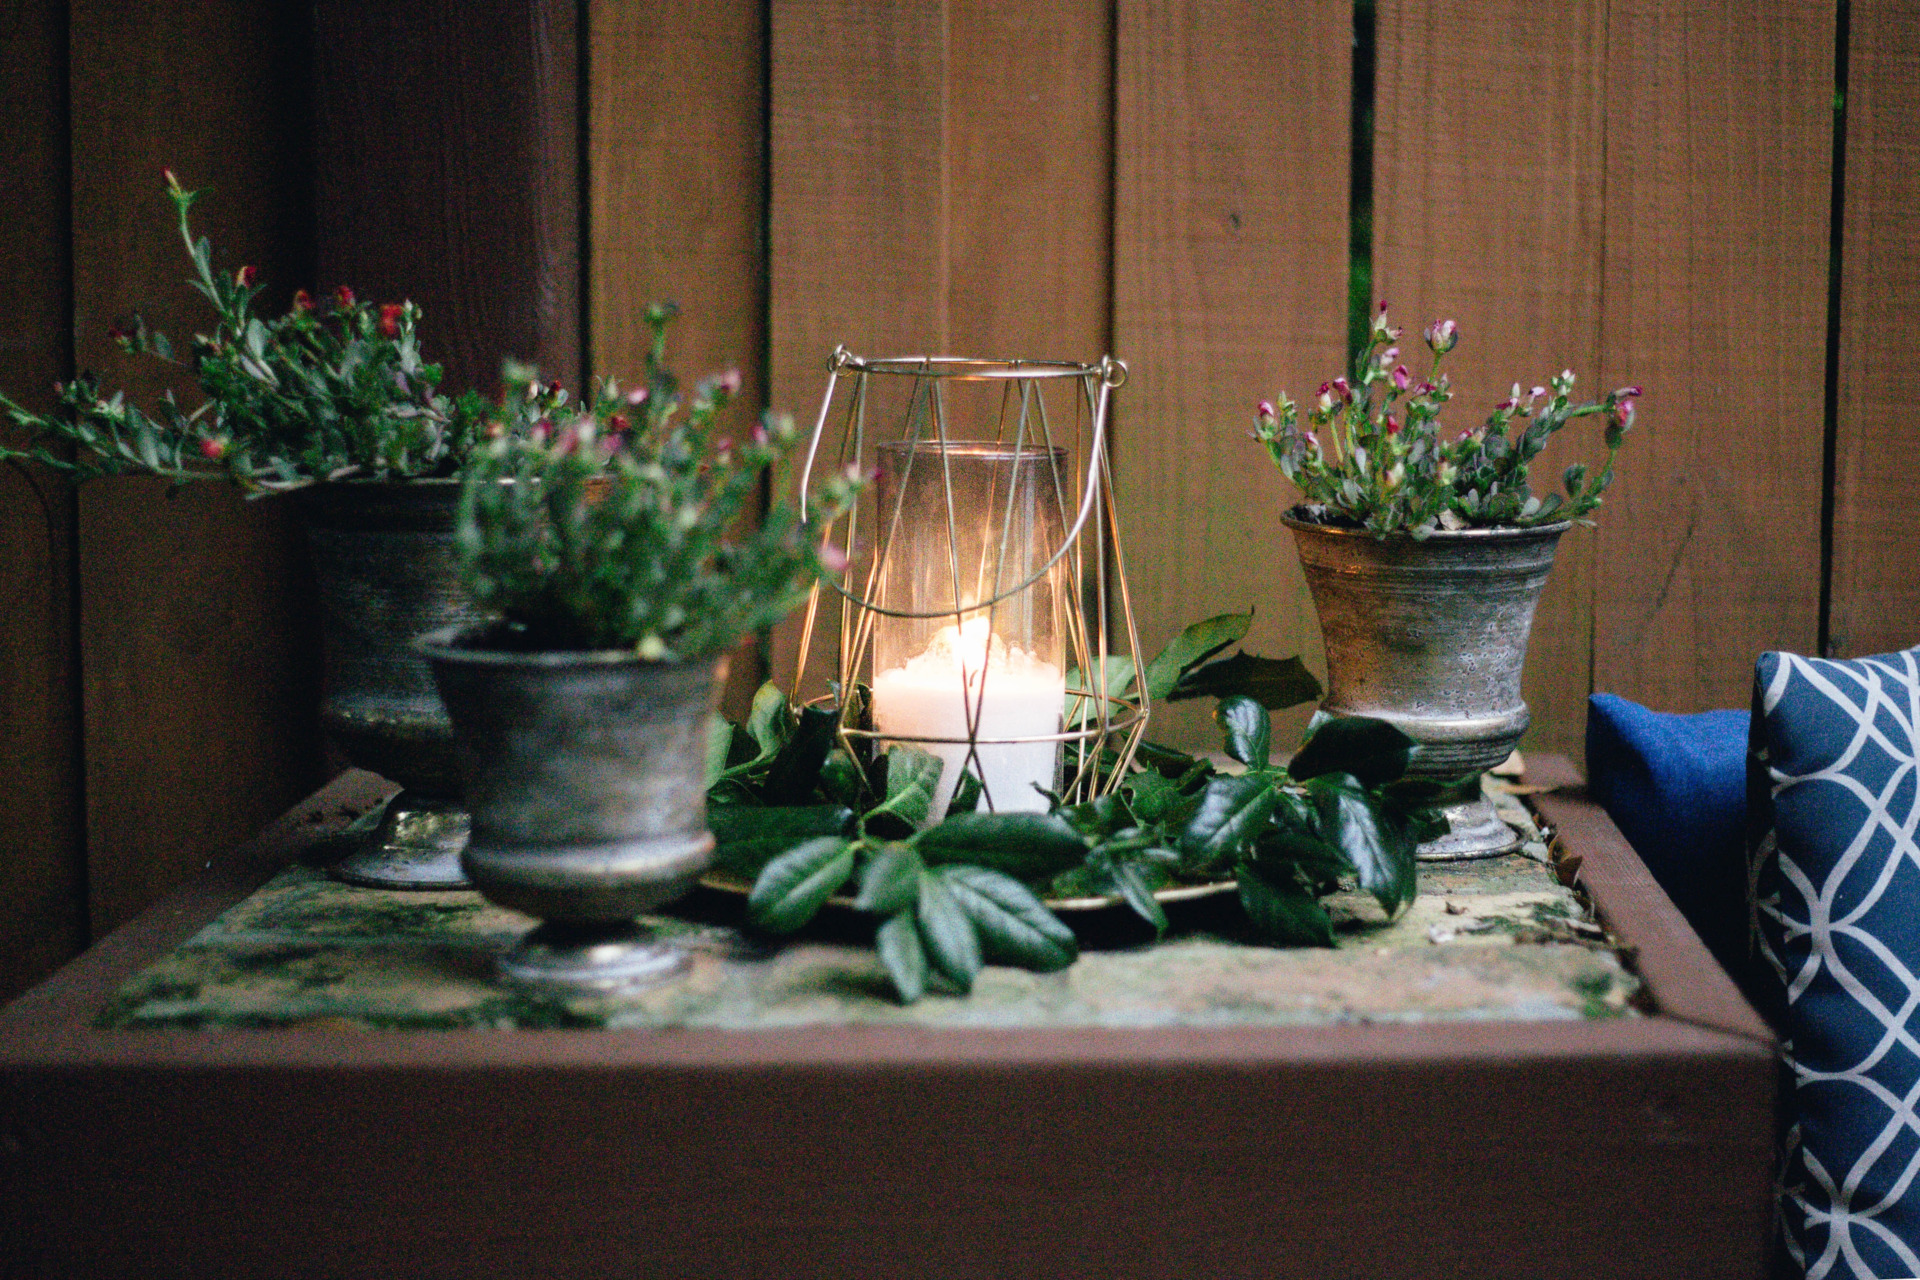 Candle on side table surrounded by plants